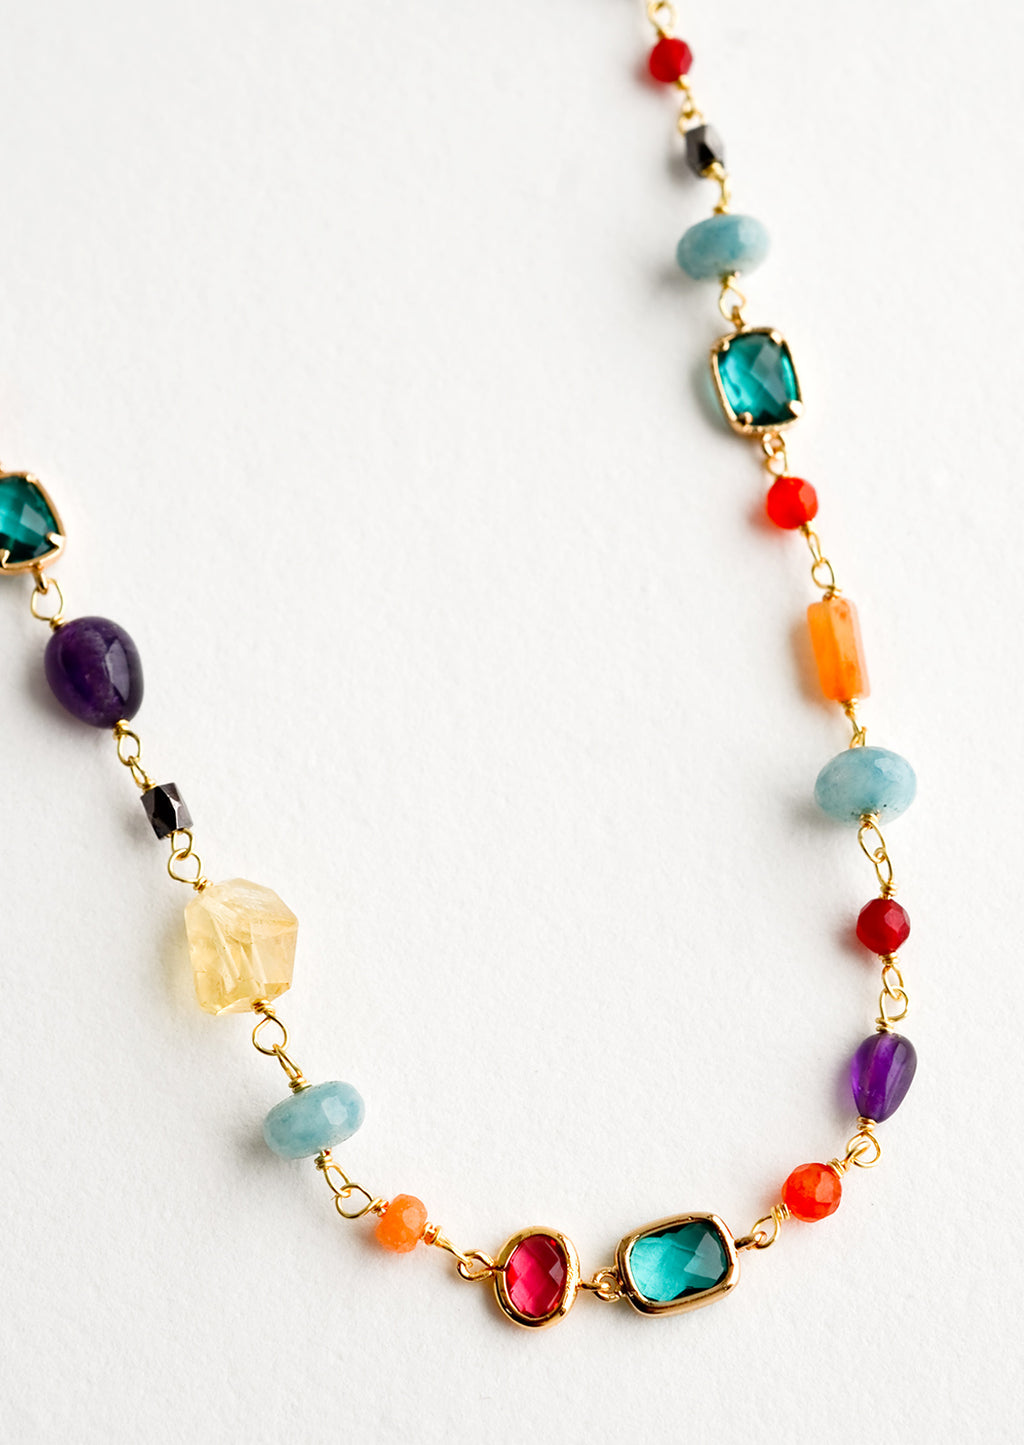 2: A necklace with individual, multicolor gemstone stations in a mix of shapes and sizes.